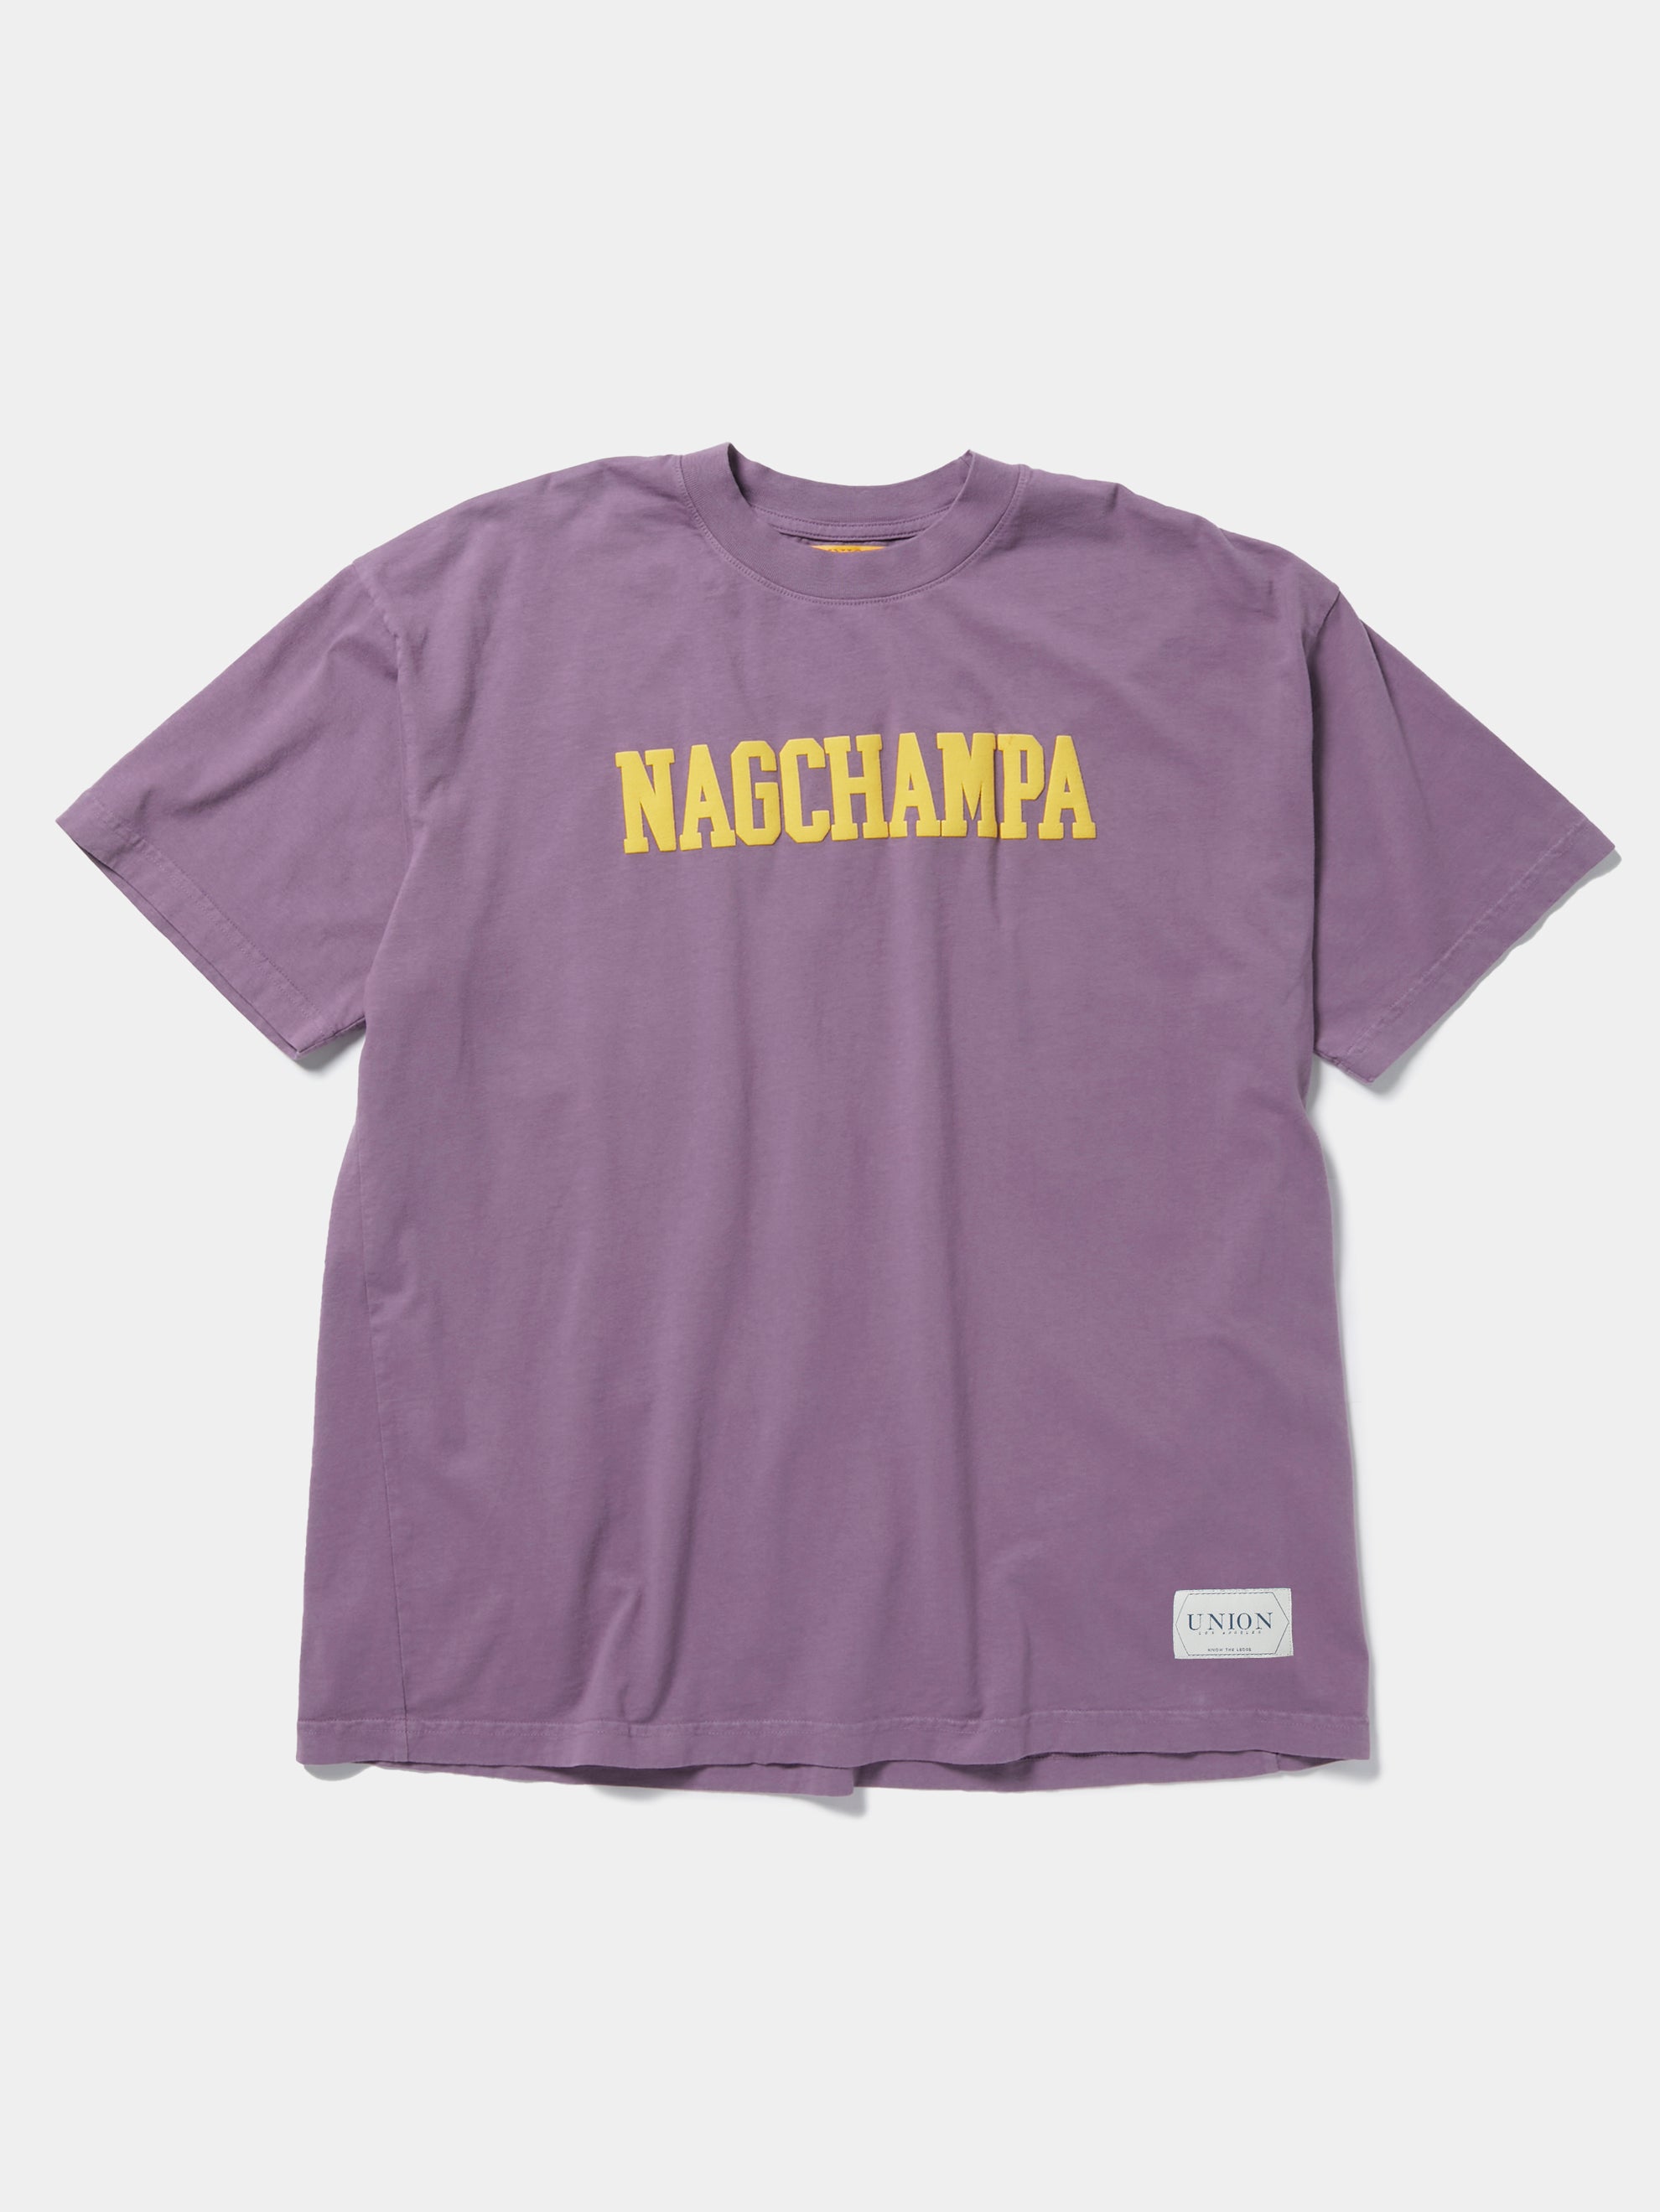 Buy Union Los Angeles NAG CHAMPA ELEVATED S/S TEE (Jam) Online at